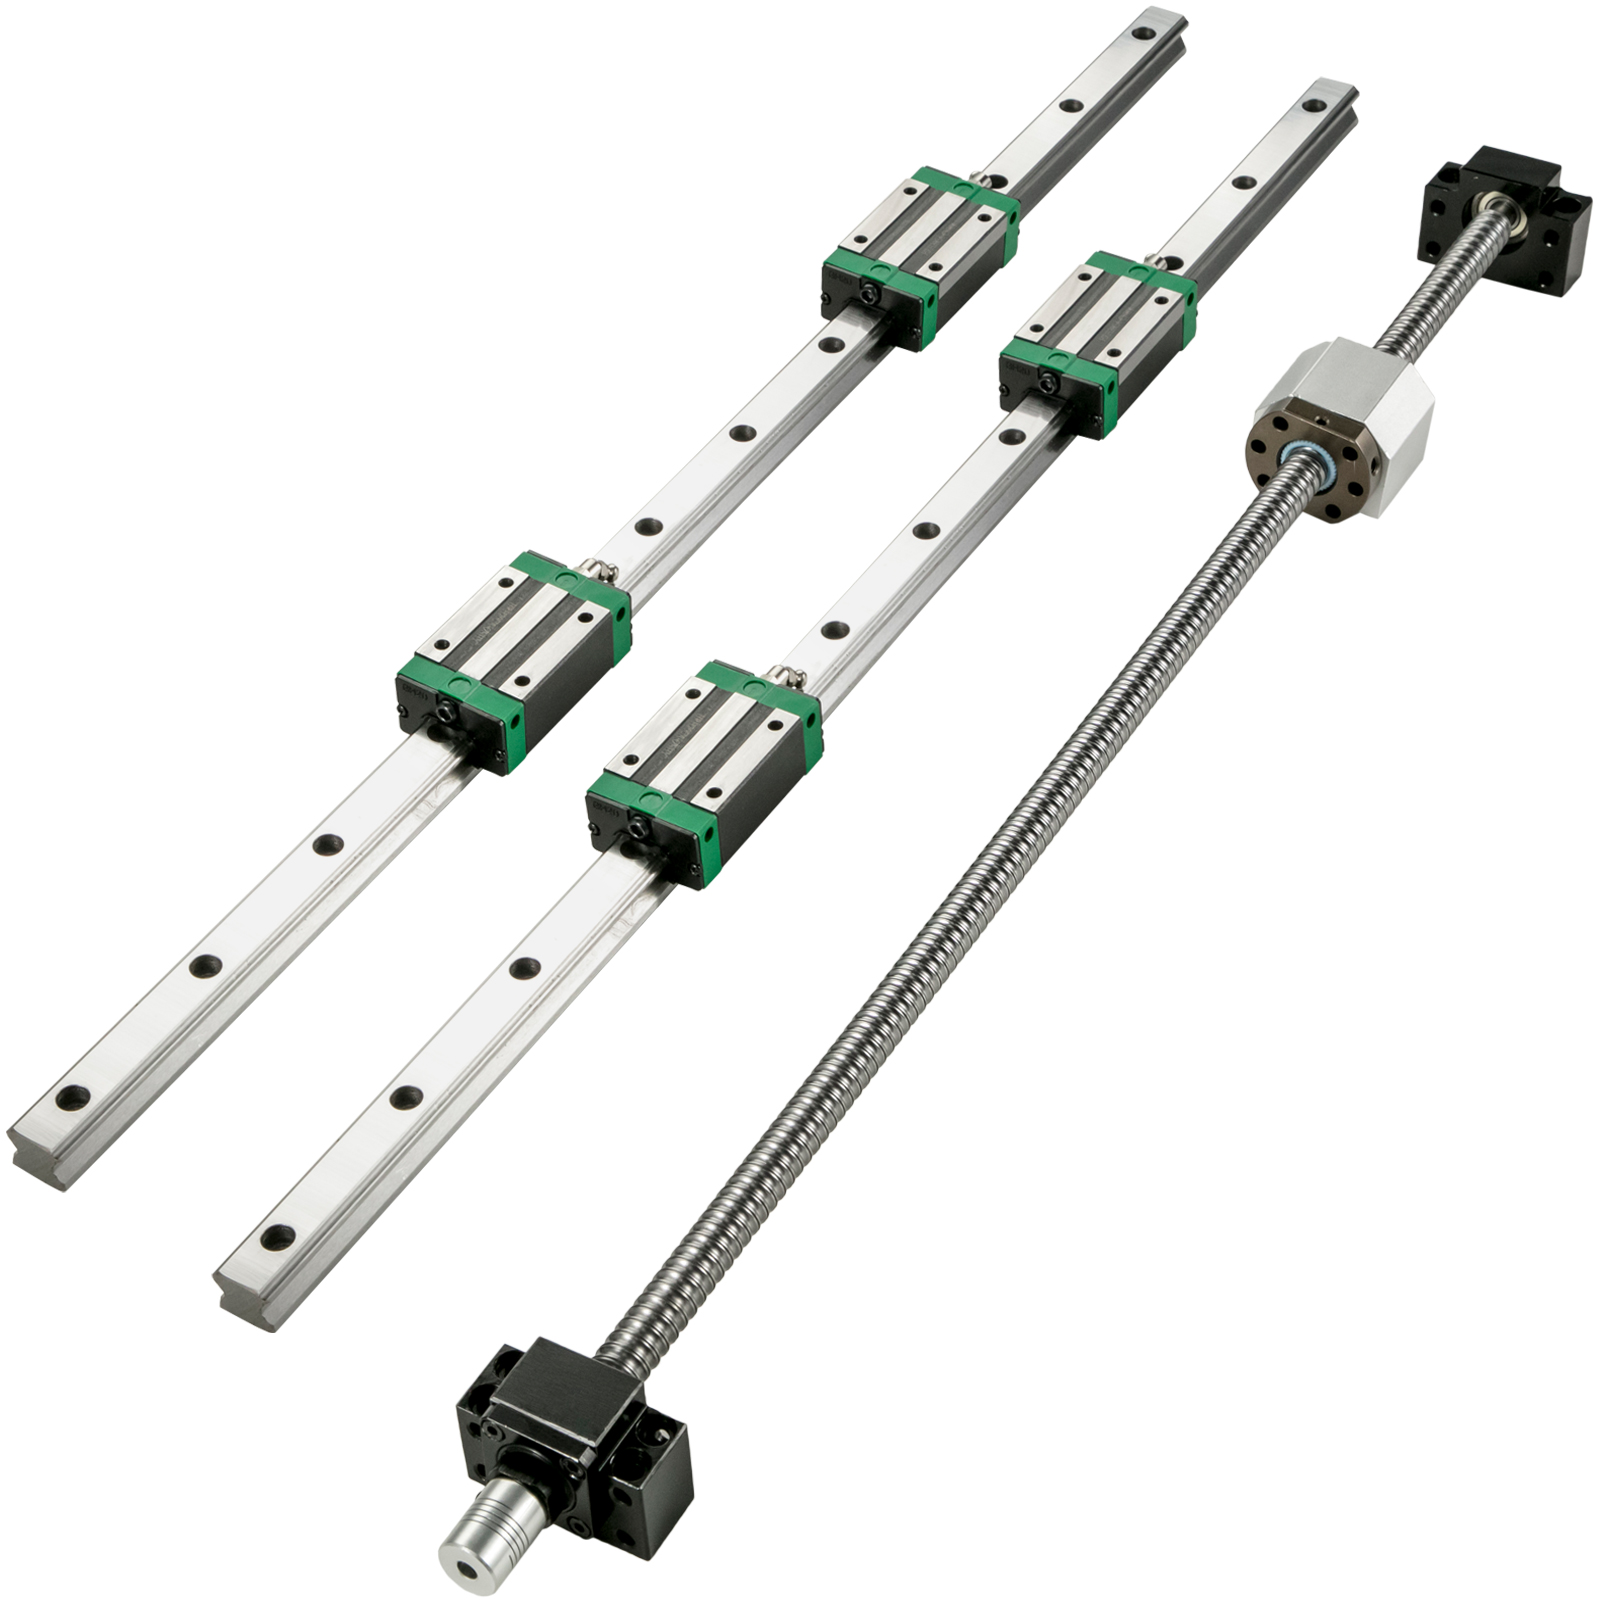 Details about   New Lot of 2 Block Runner Carriage Ball Rails 296mm With Caps Length 